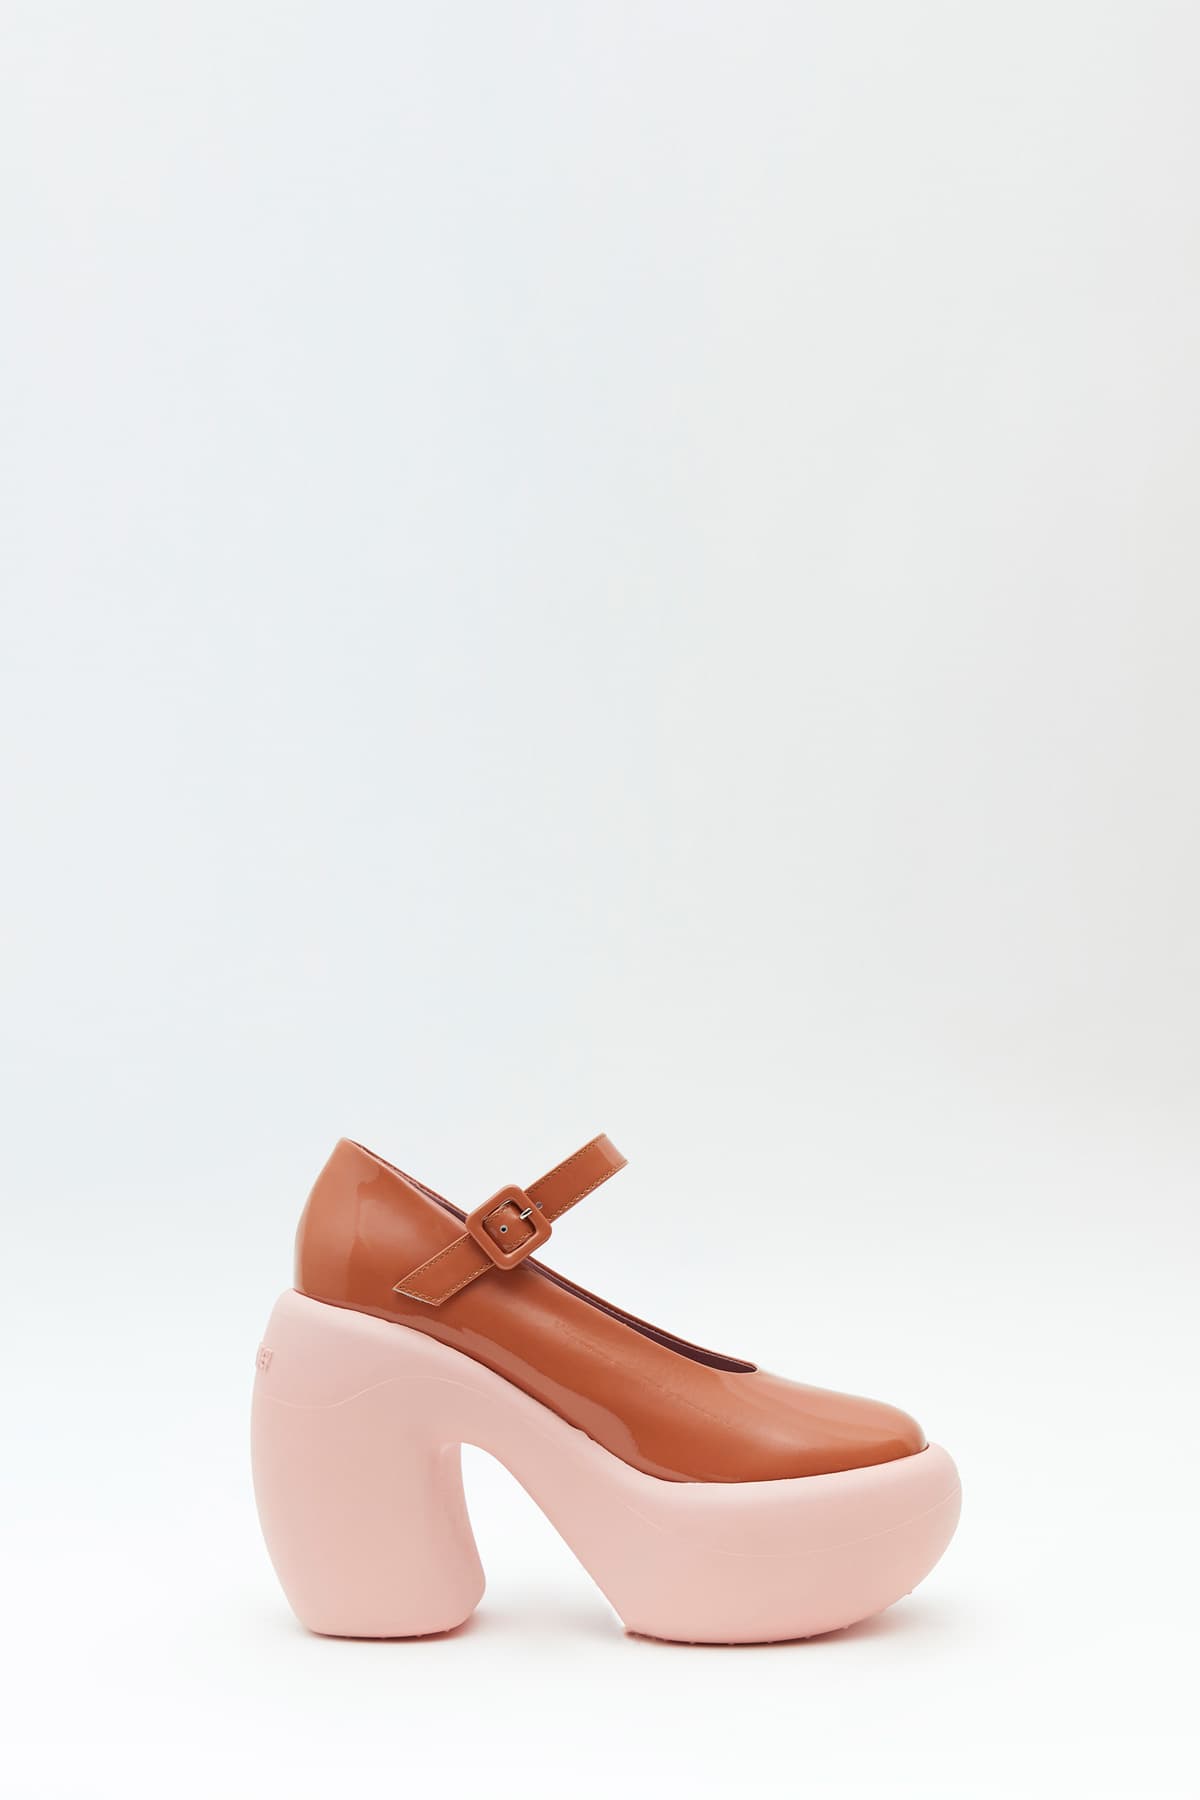 Sideview of Honey Bubble Mary Jane in cognac and pink rubber sole from the Haus of Honey fall-winter 2023-24